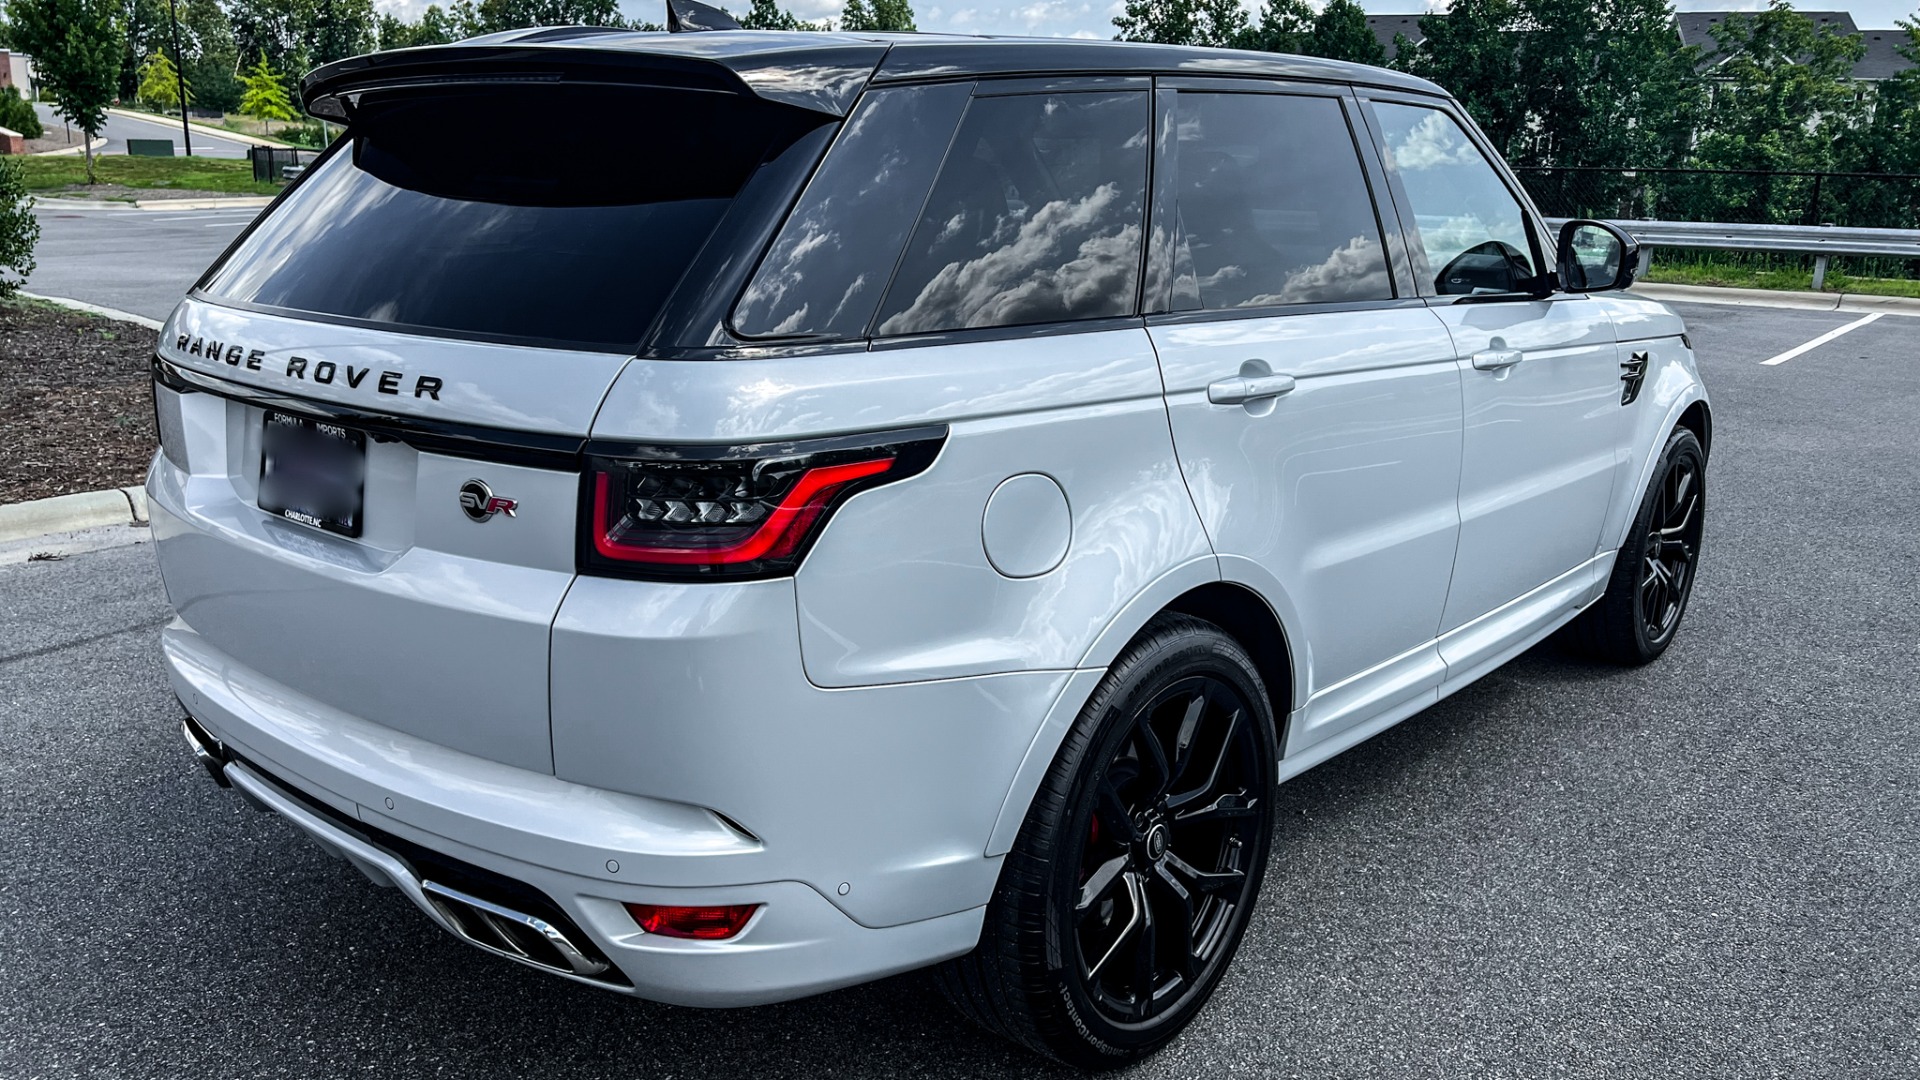 Used 2018 Land Rover Range Rover Sport SVR / SVO ULTRA METALLIC PAINT / MERIDIAN SIGNATURE / 22IN WHEELS for sale $99,995 at Formula Imports in Charlotte NC 28227 9